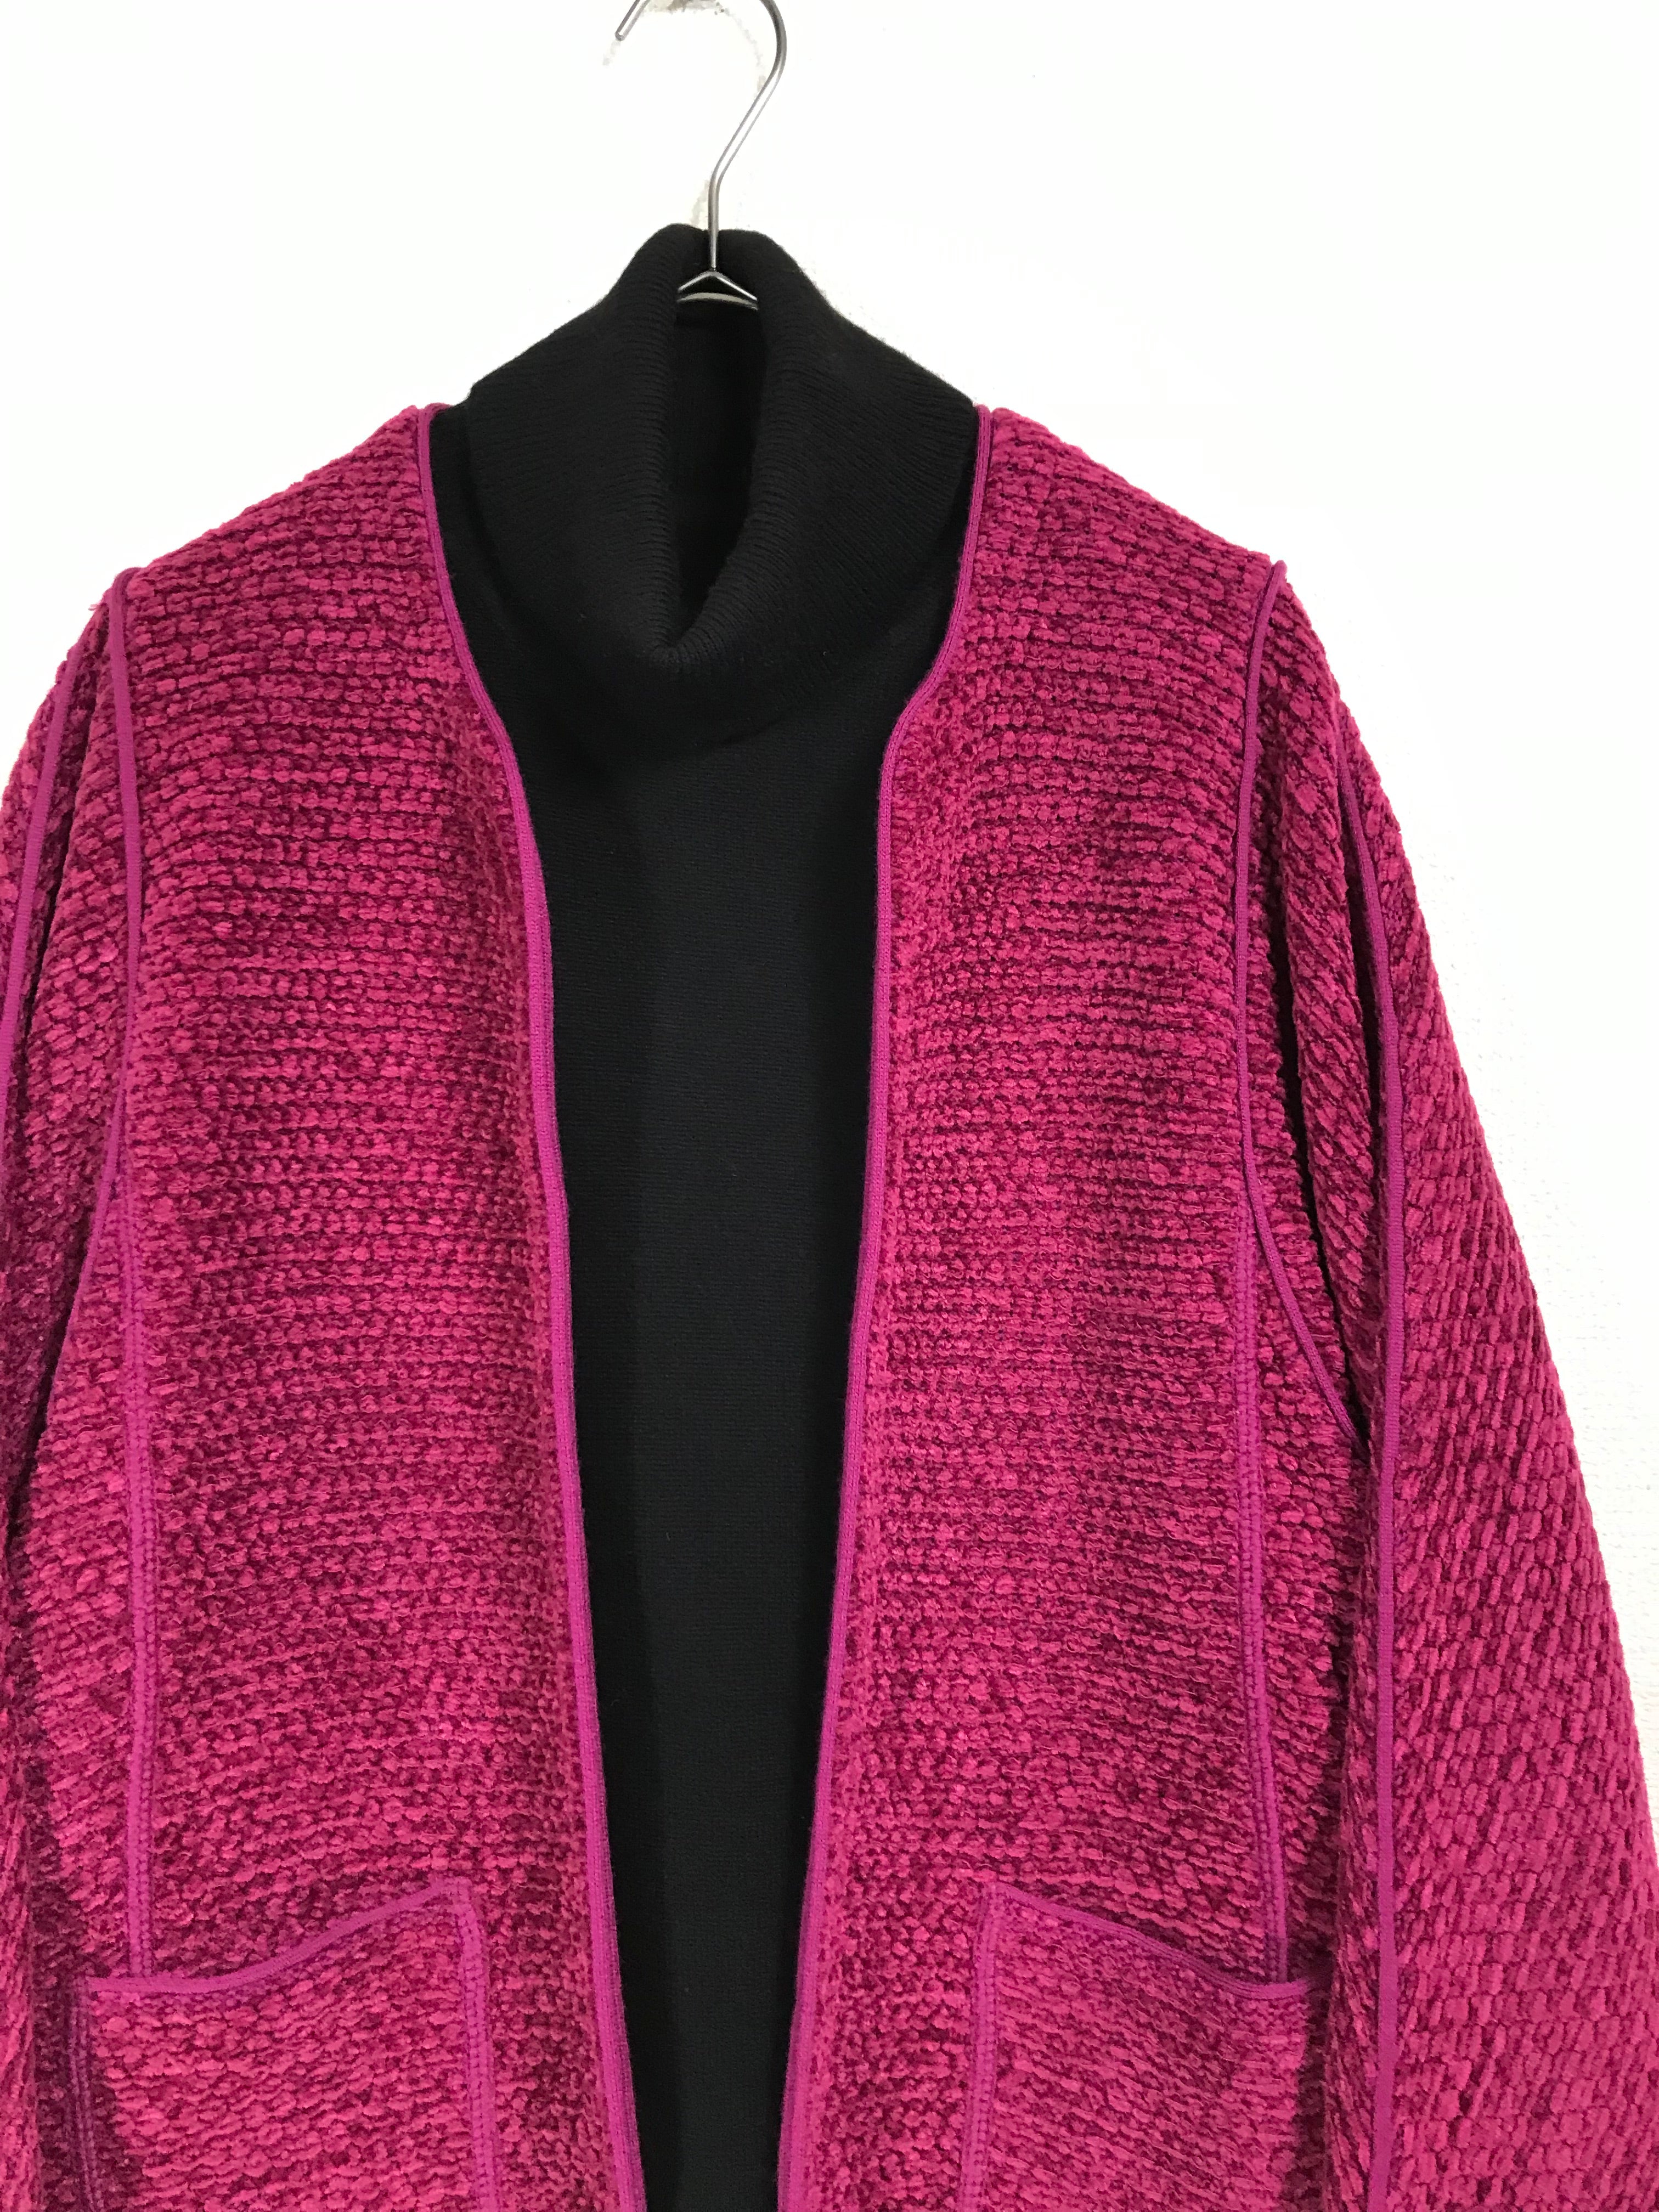 knitted fabric collarless jacket